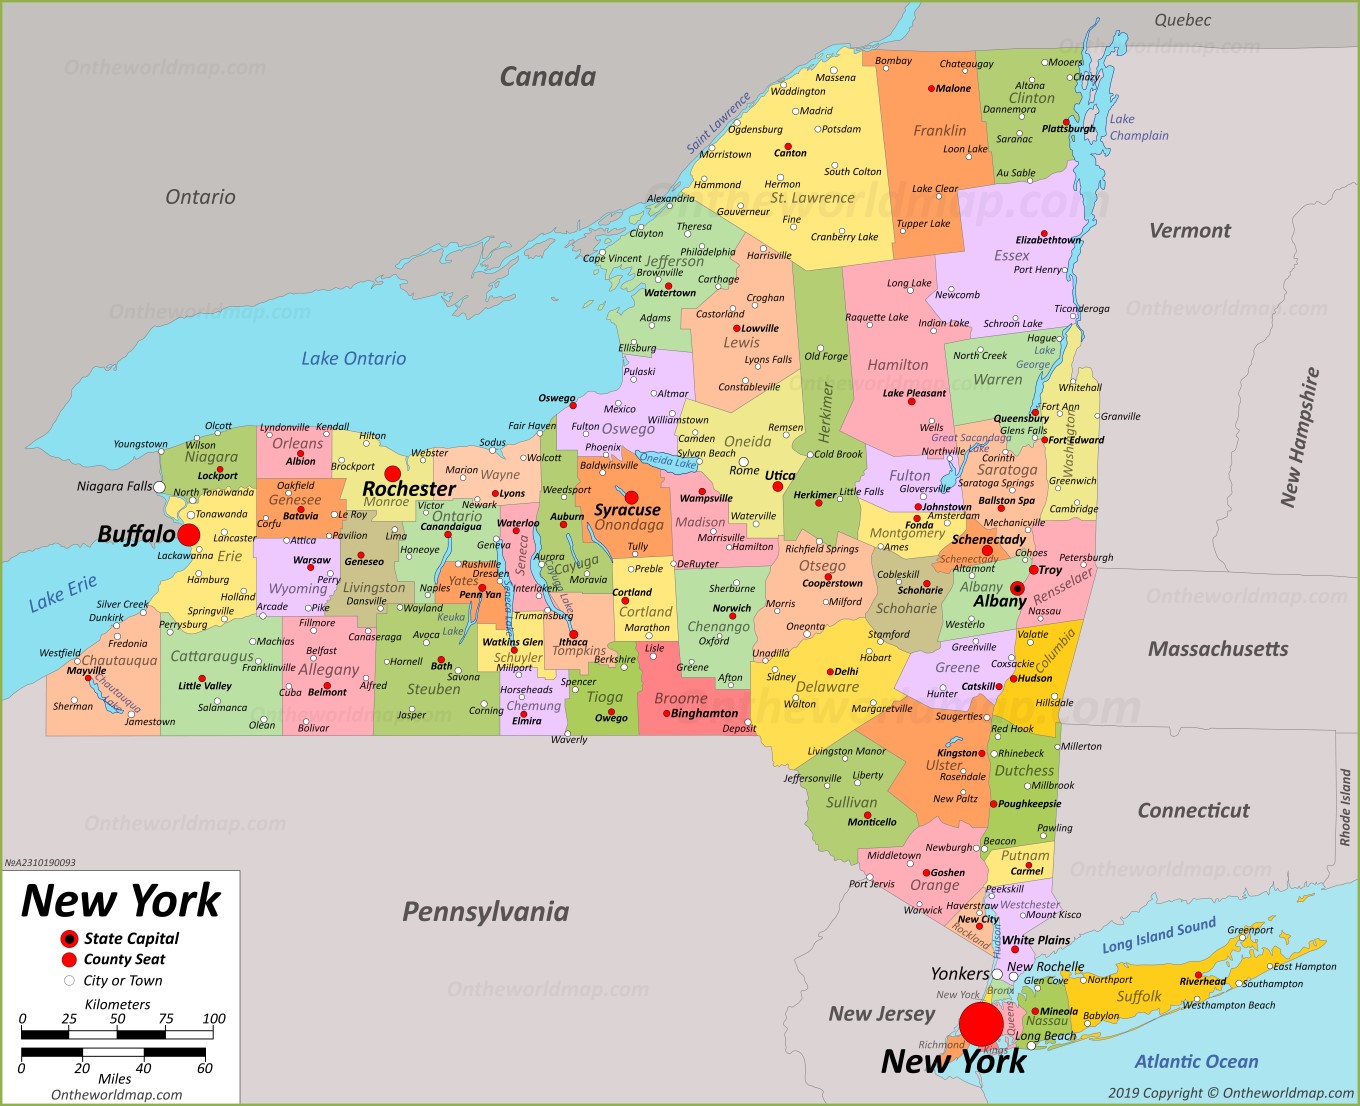 new york state map picture New York State Maps Usa Maps Of New York Ny new york state map picture